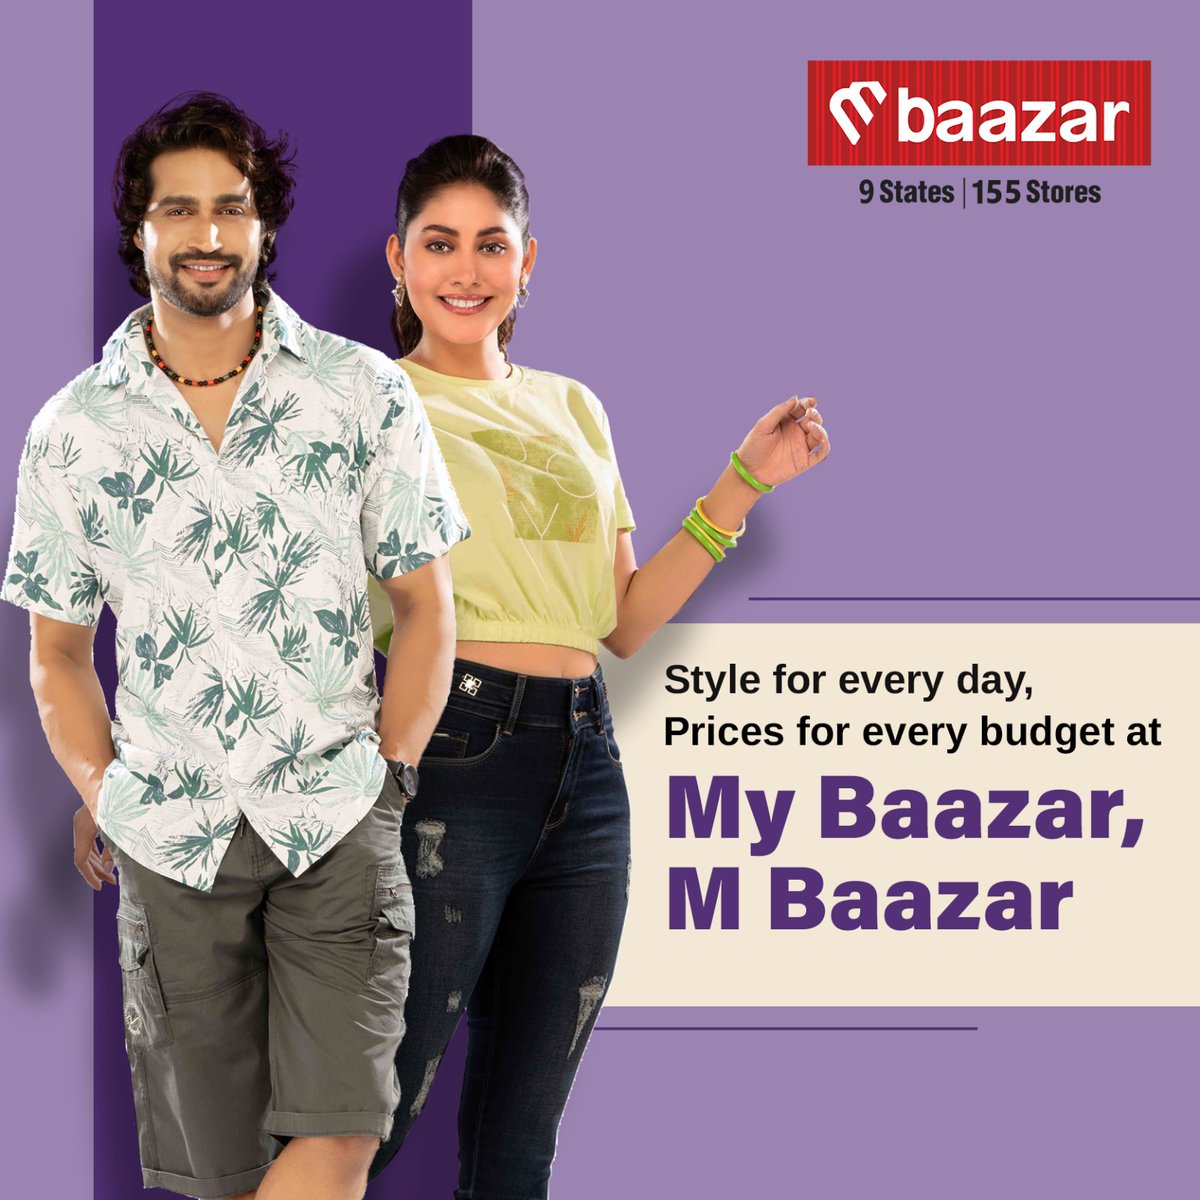 We design clothes that enhance your uniqueness, adding that little extra oomph, all at affordable prices. Discover your fashion favourites at #MyBaazarMBaazar #mbaazar #thefashionstore #shoppingatmbaazar #comfortableclothing #fashionista  #fashionstore #affordablefashion